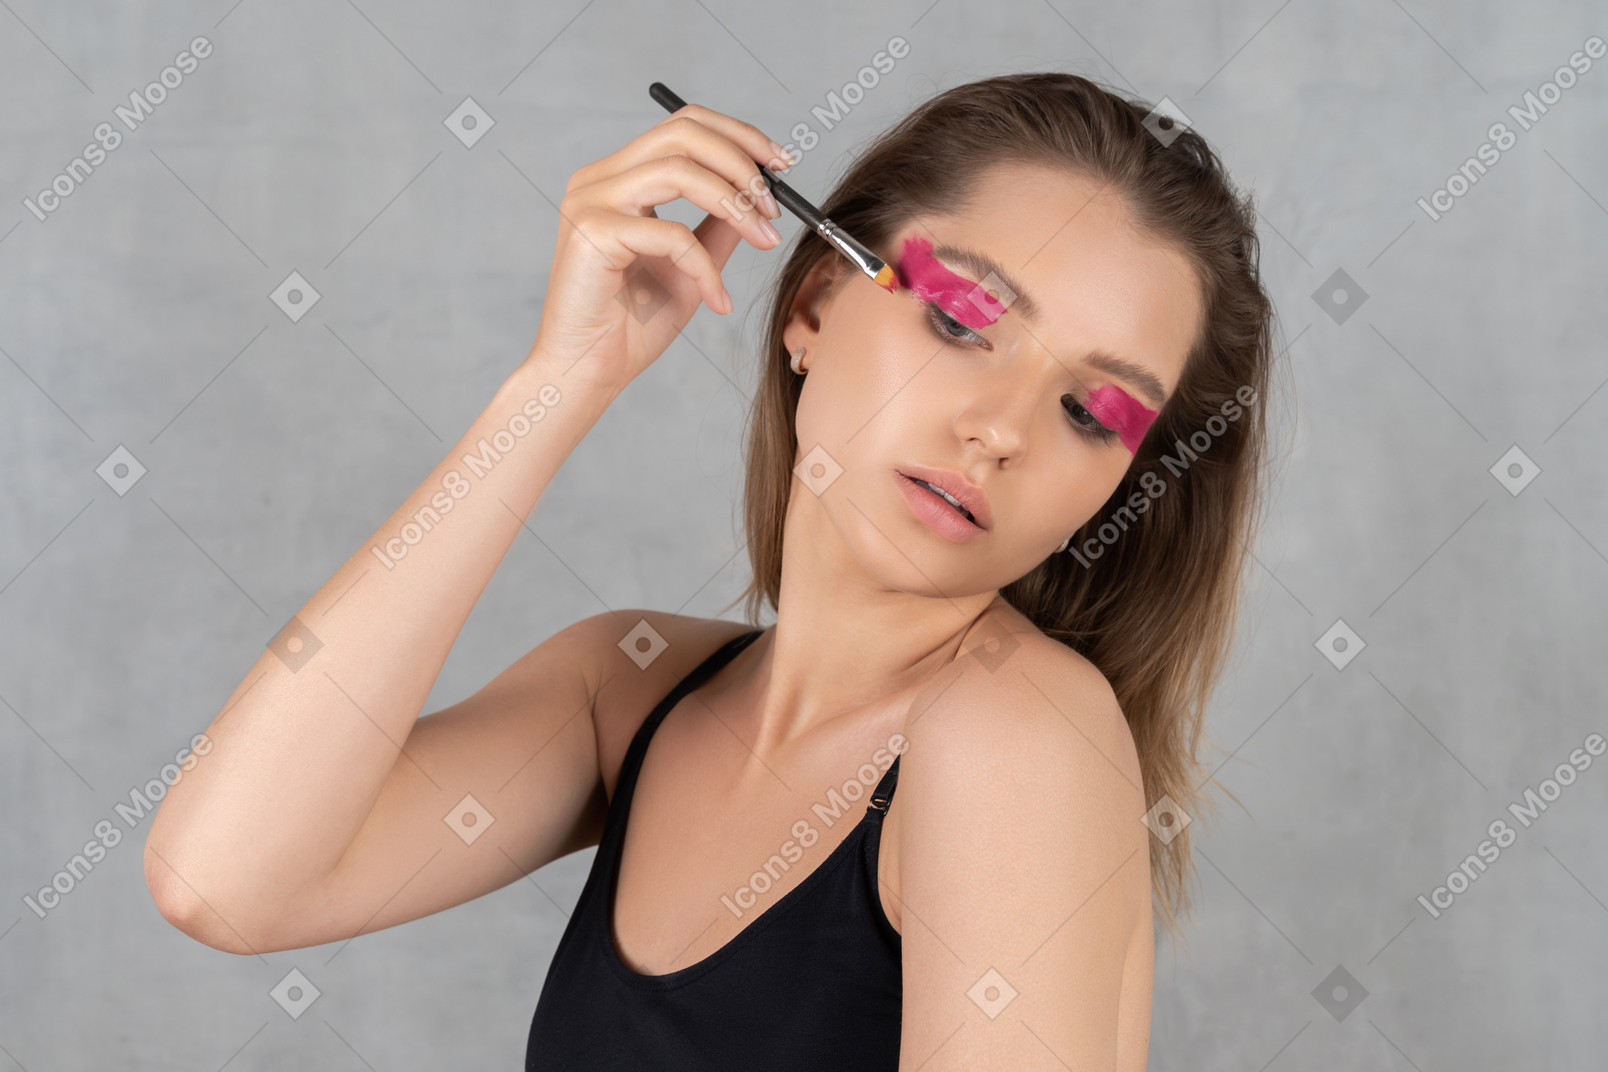 Portrait of a young woman putting eyeshadow on